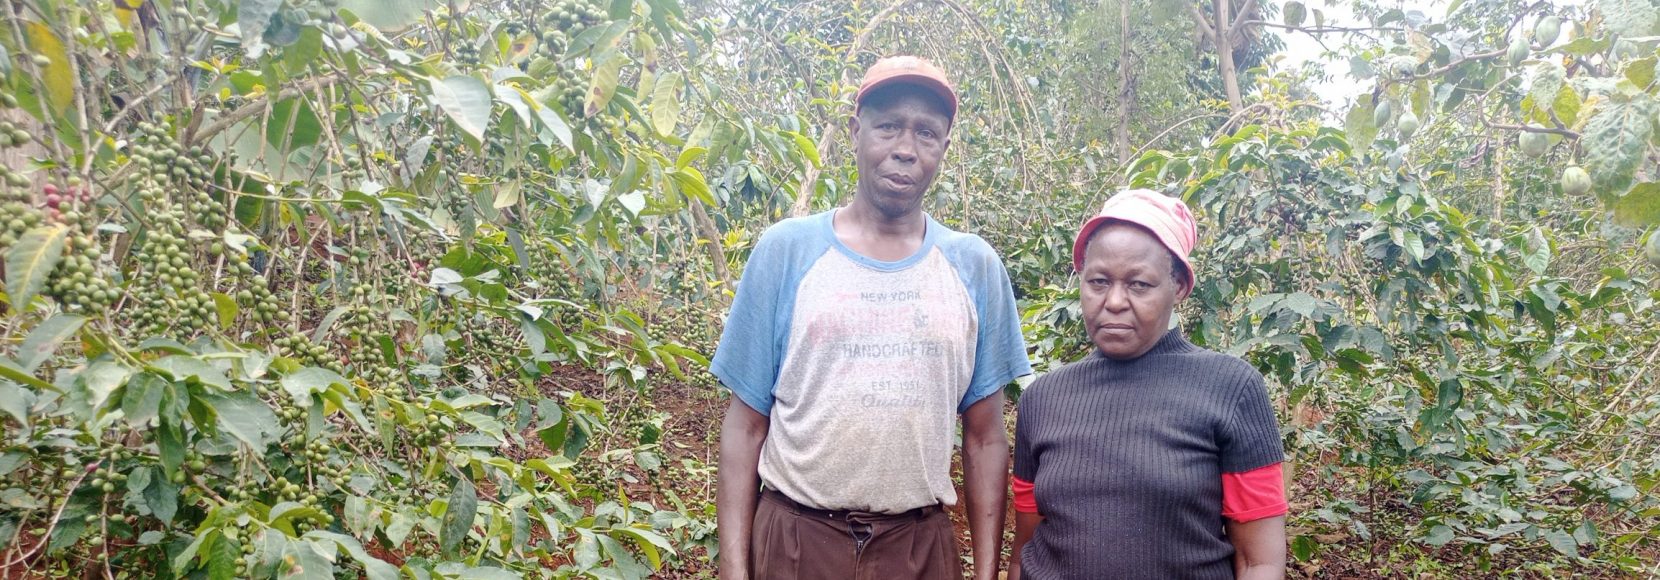 James and Lucy in their coffee farm